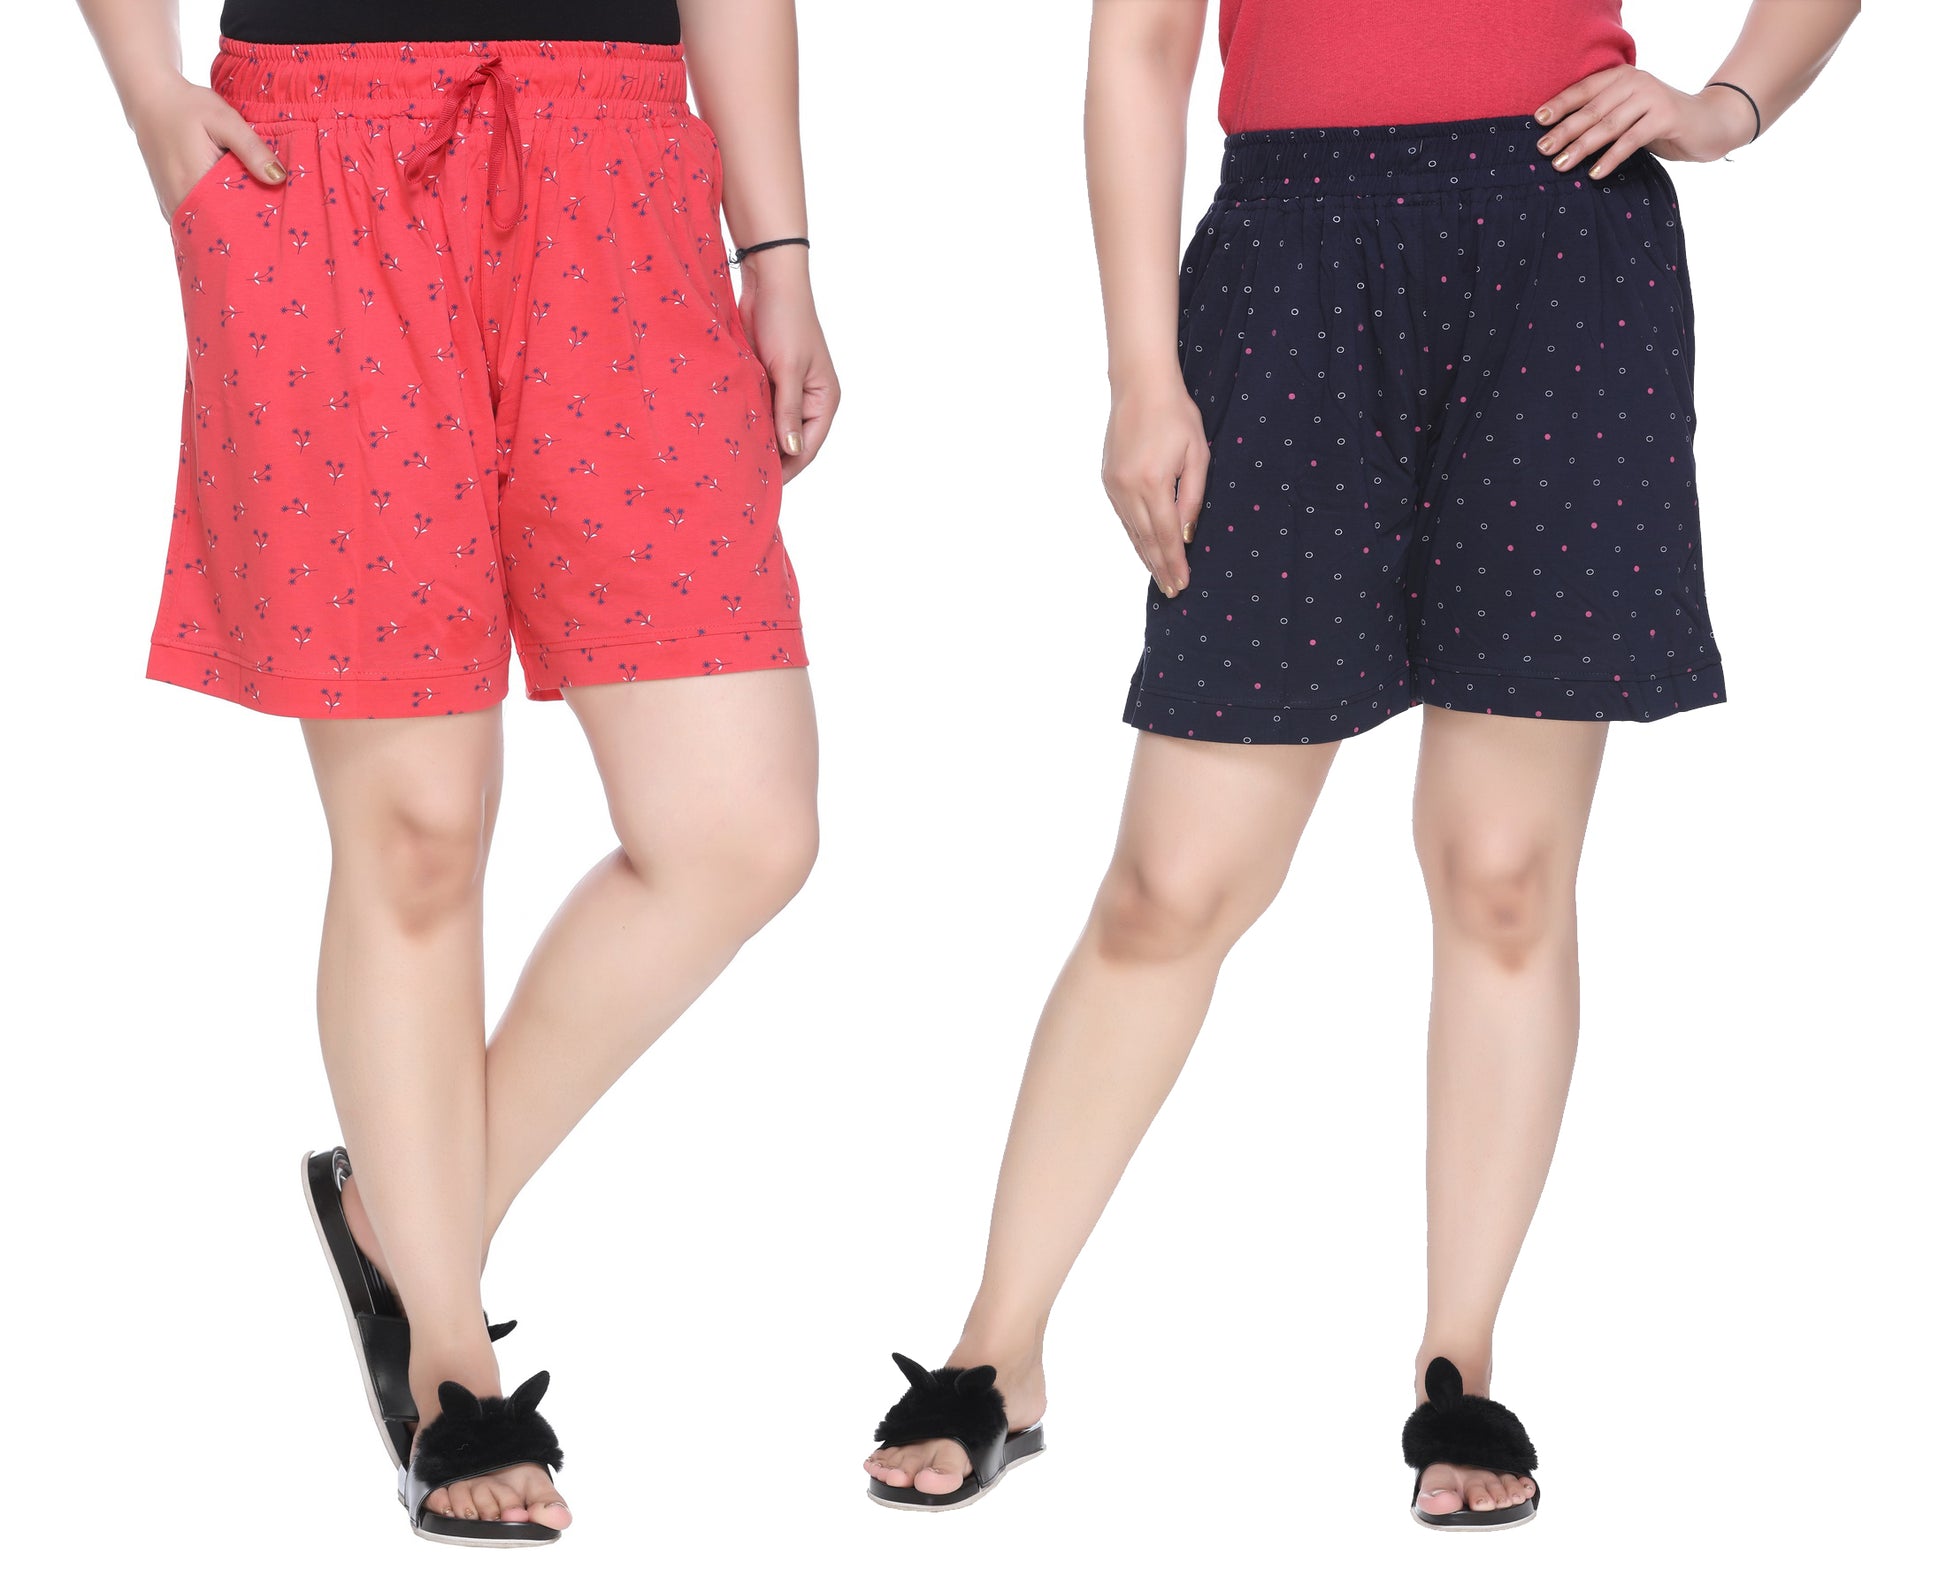 Plus Size Cotton Shorts For Women - Printed Bermuda Combo (Coral Red & Navy Blue)